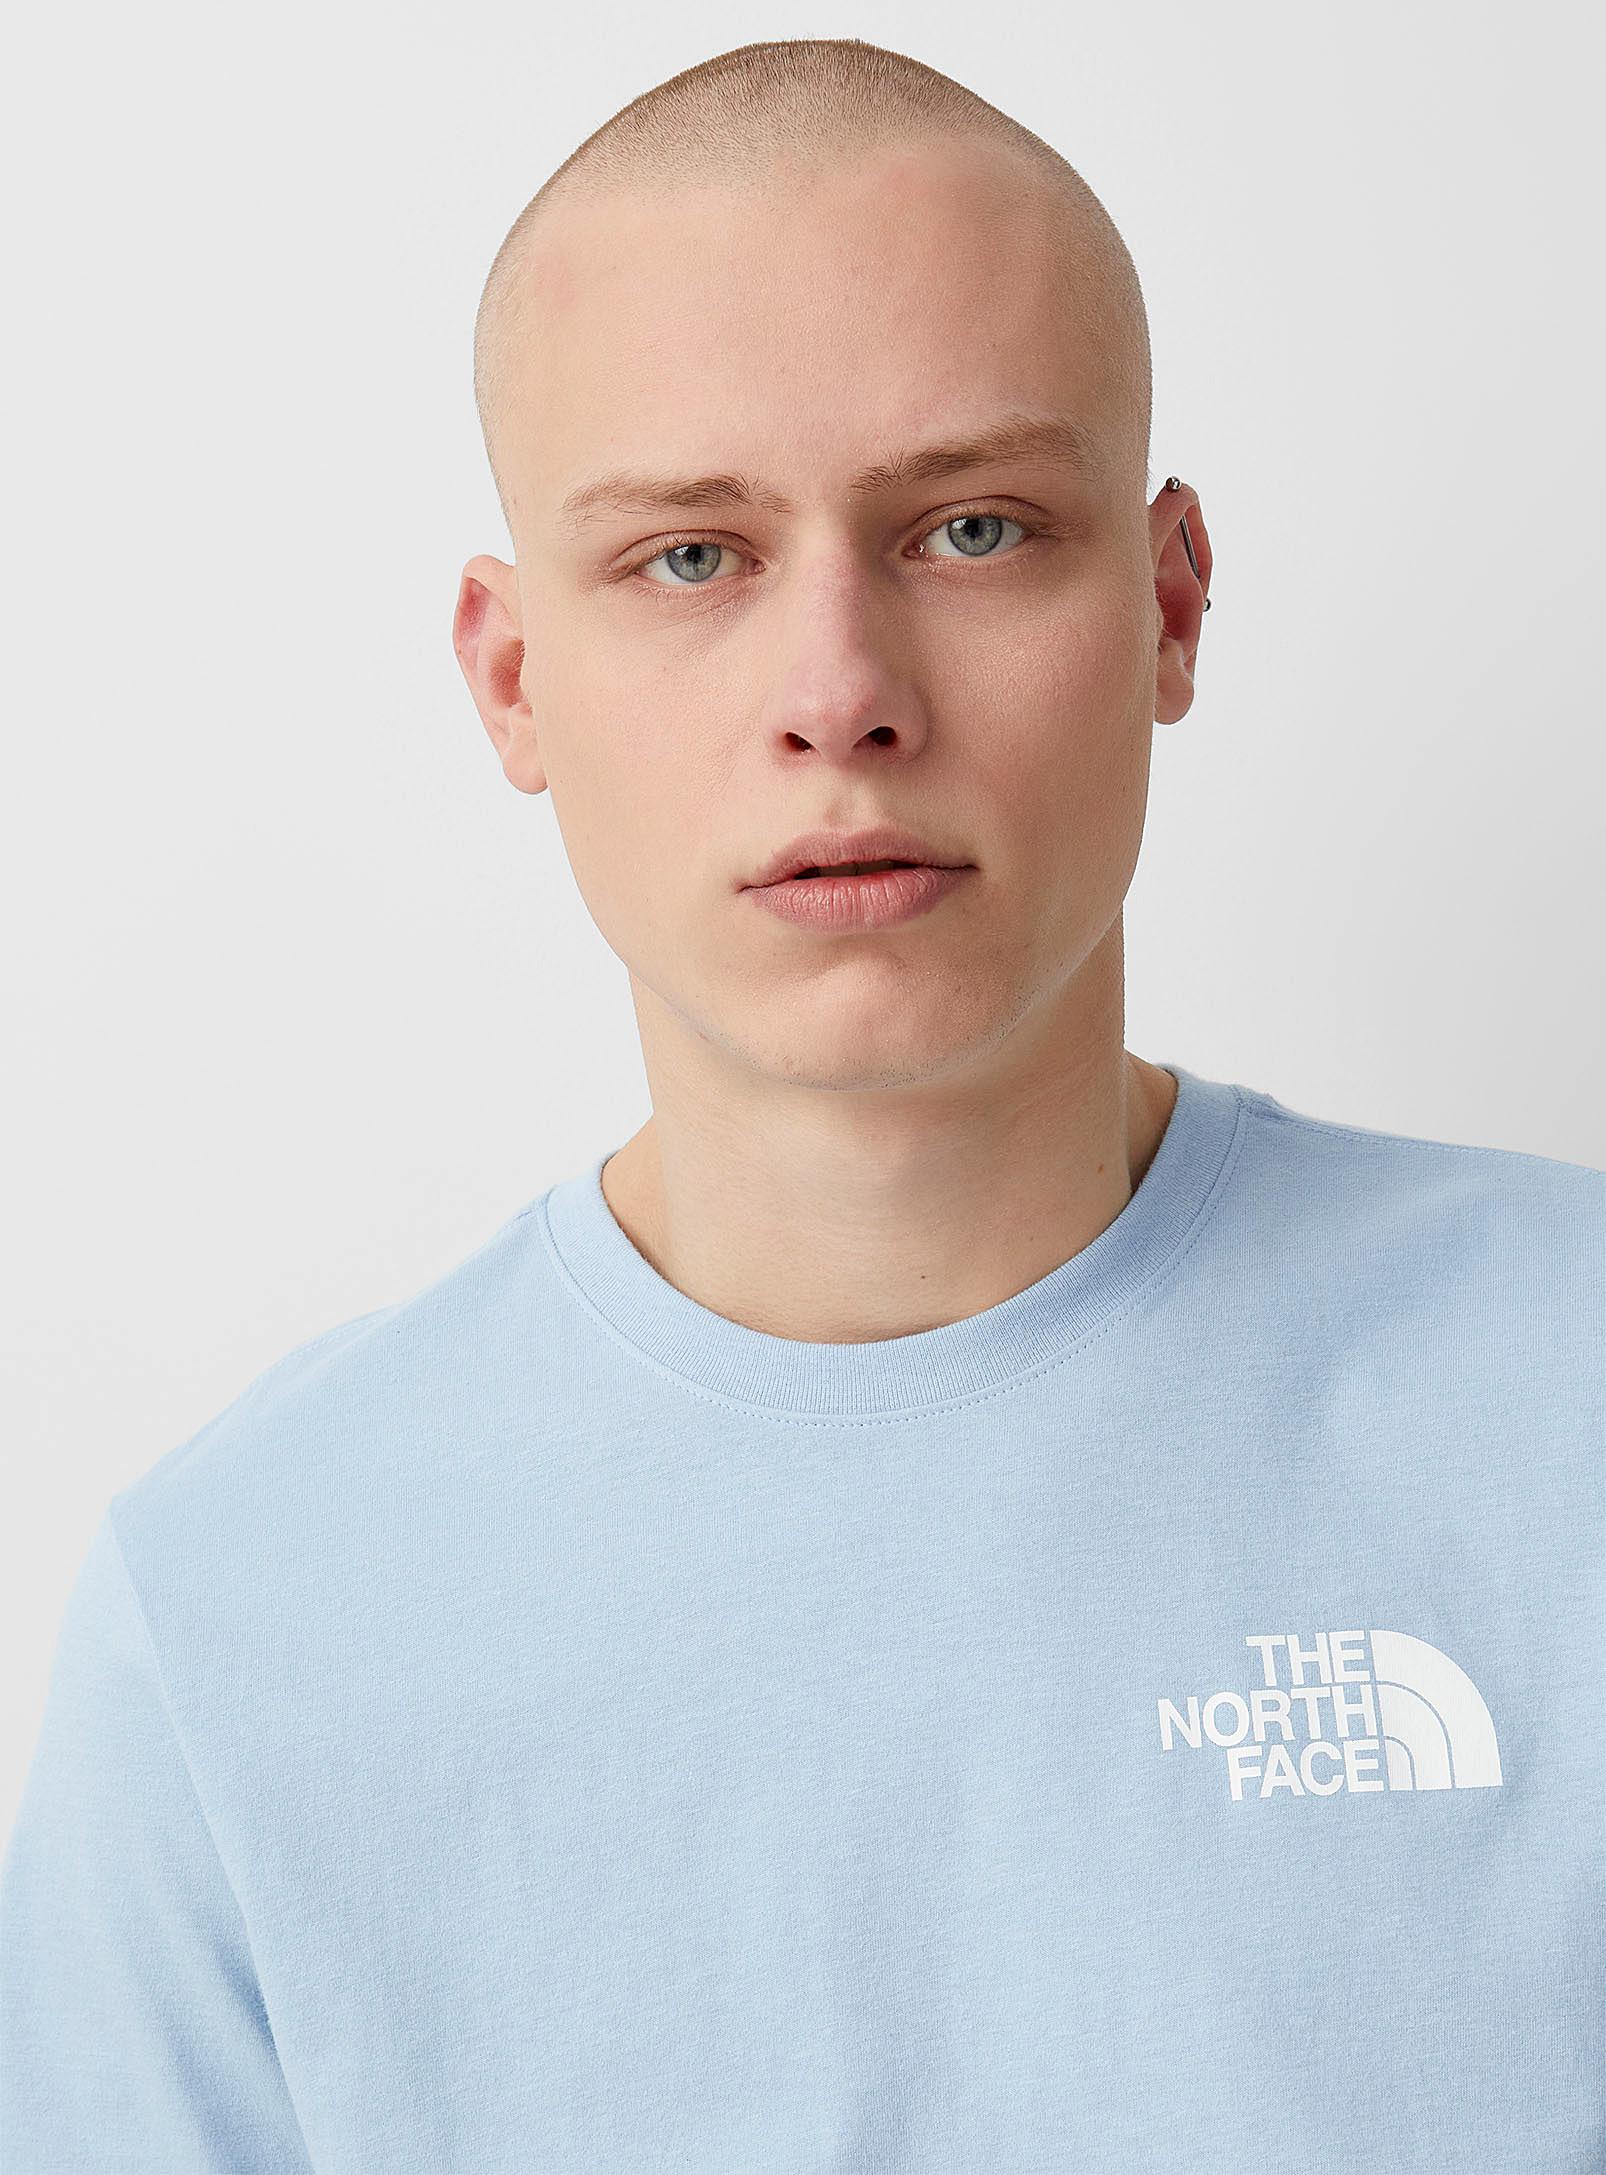 The North Face Cotton Red Box T in Baby Blue (Blue) for Men - Lyst